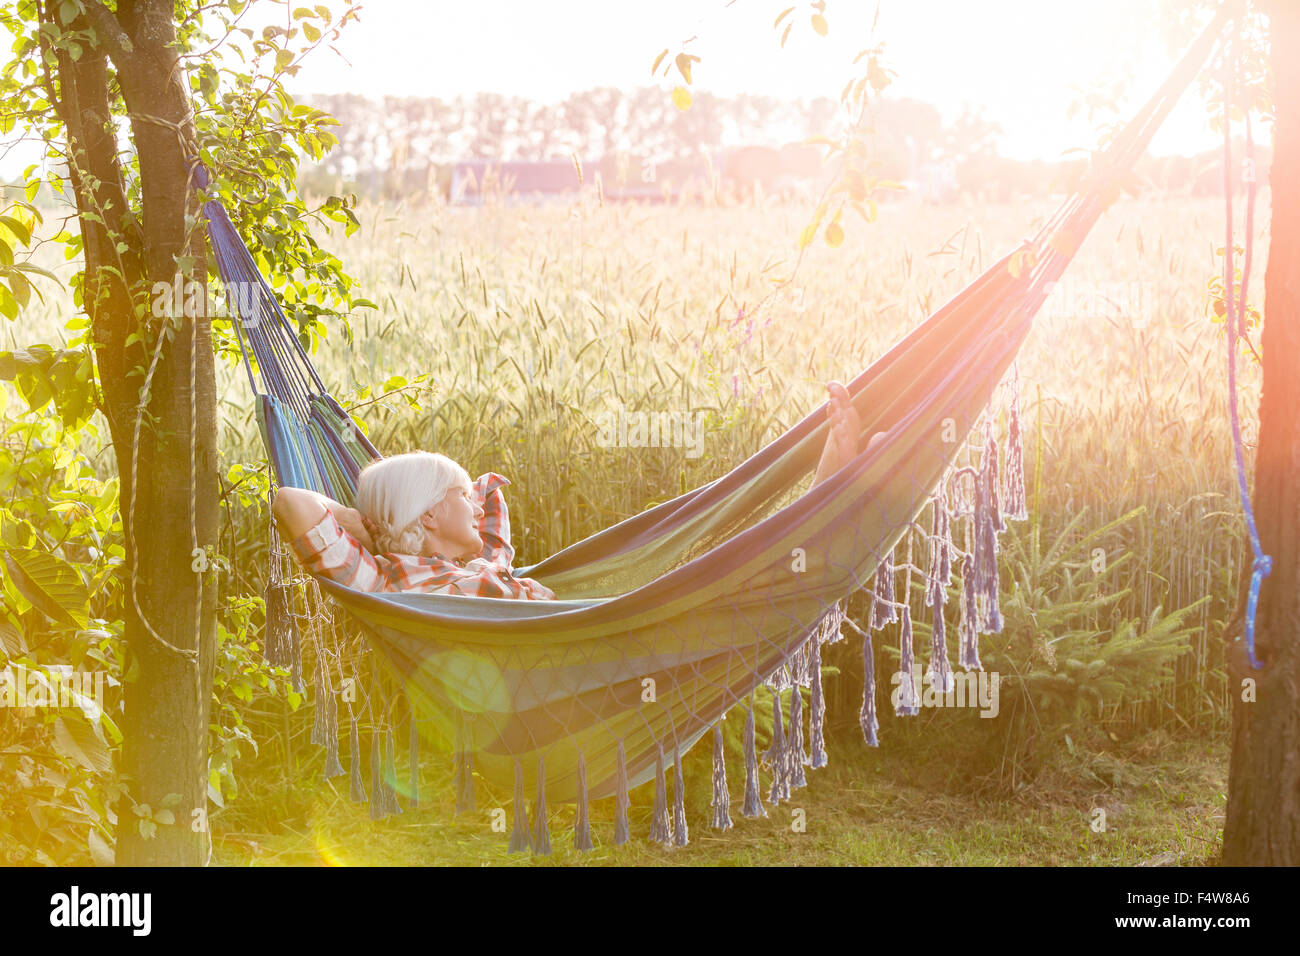 Serene woman napping in hammock next to sunny rural wheat field Stock Photo